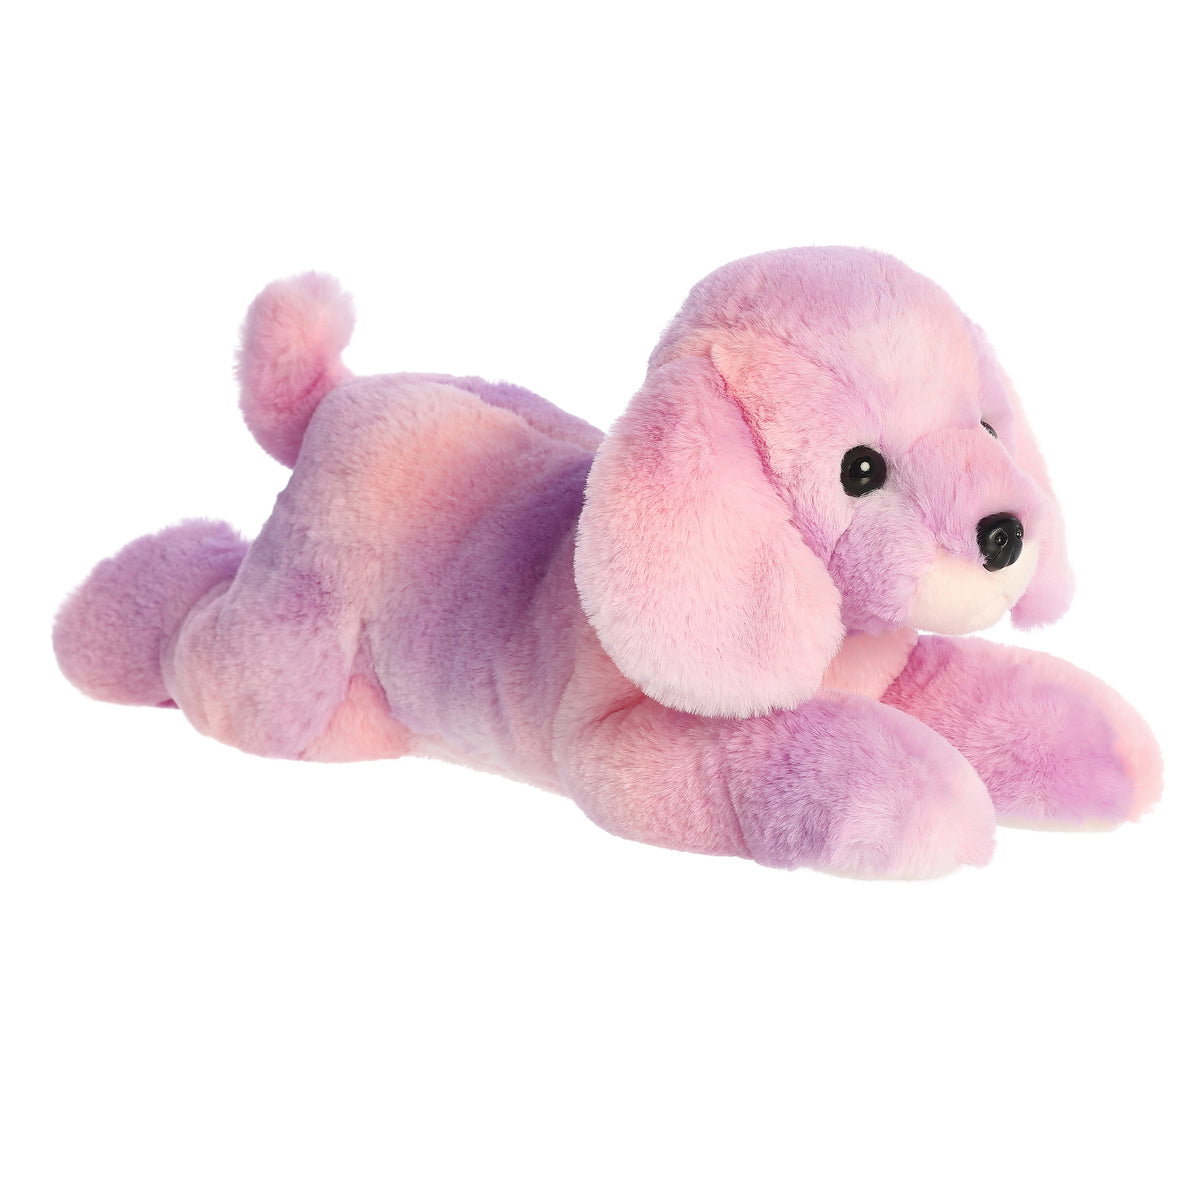 Grand Flopsie pink Pandora plush pup in a cozy resting pose, featuring light pink and purple fur, by Aurora.